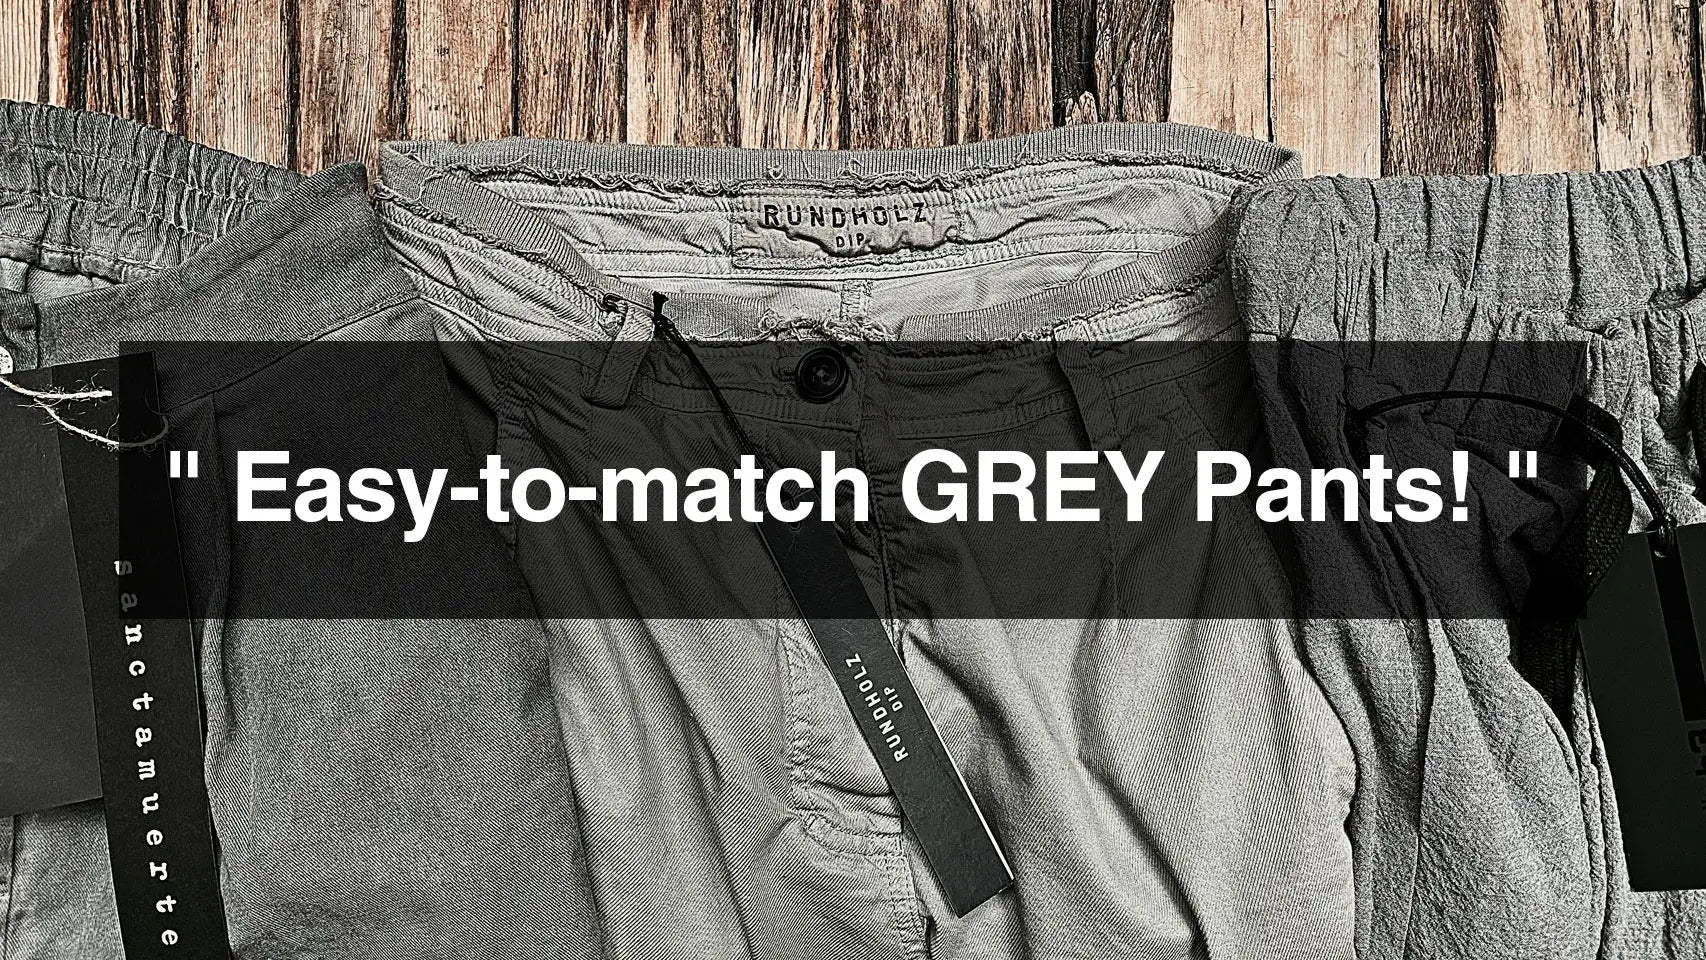 Easy-to-match GREY Pants!